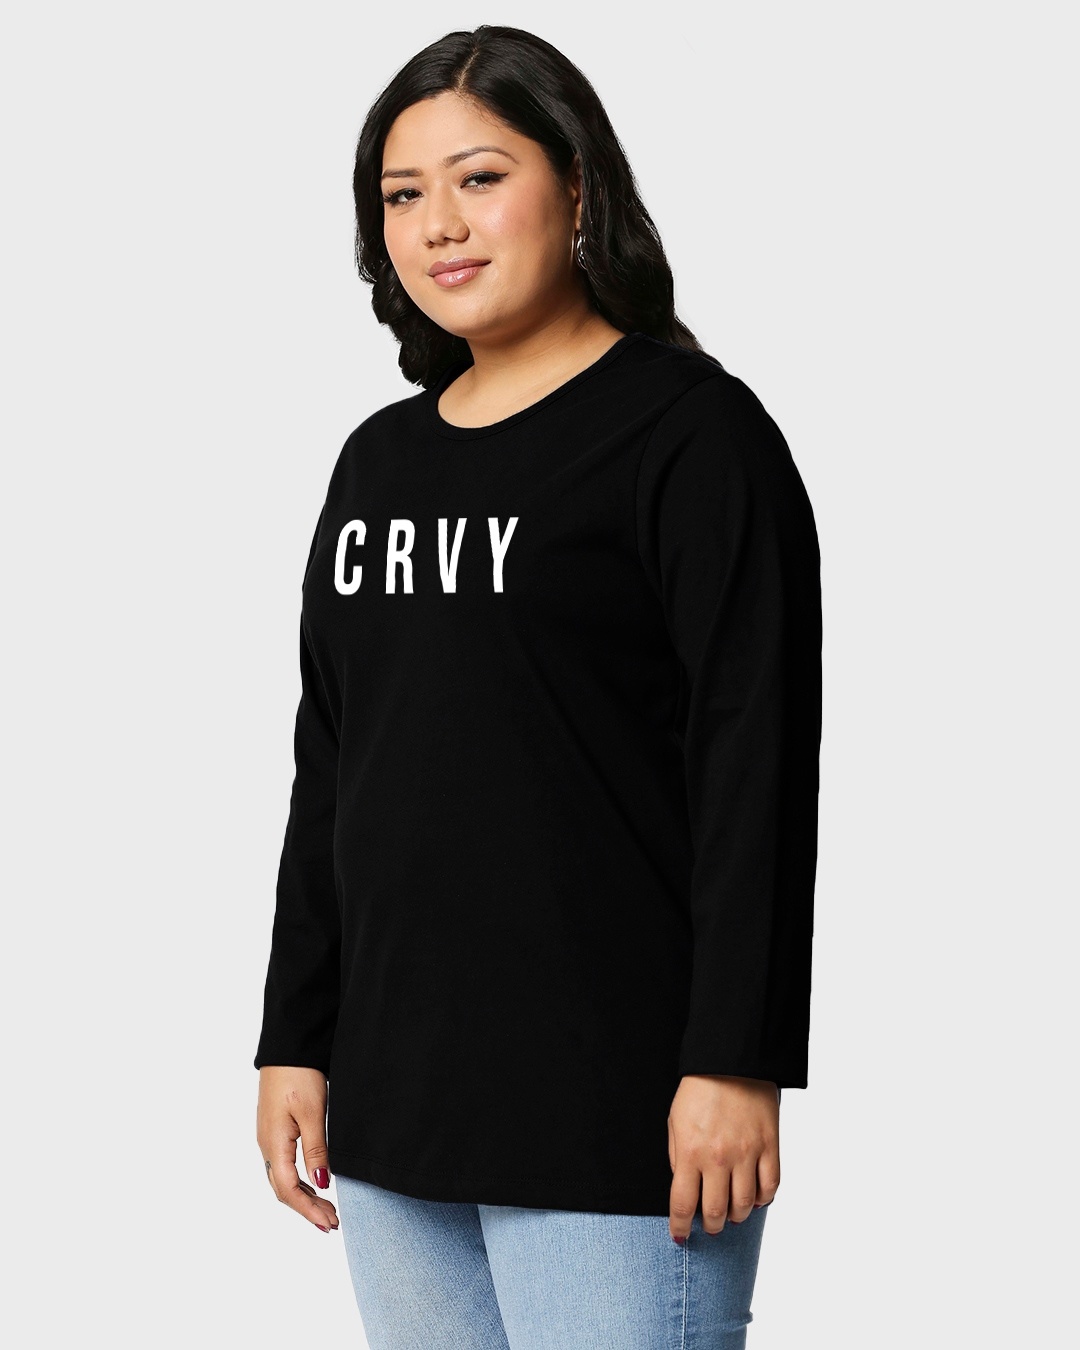 Shop Crvy Full Sleeves Printed T-Shirt Plus Size-Back